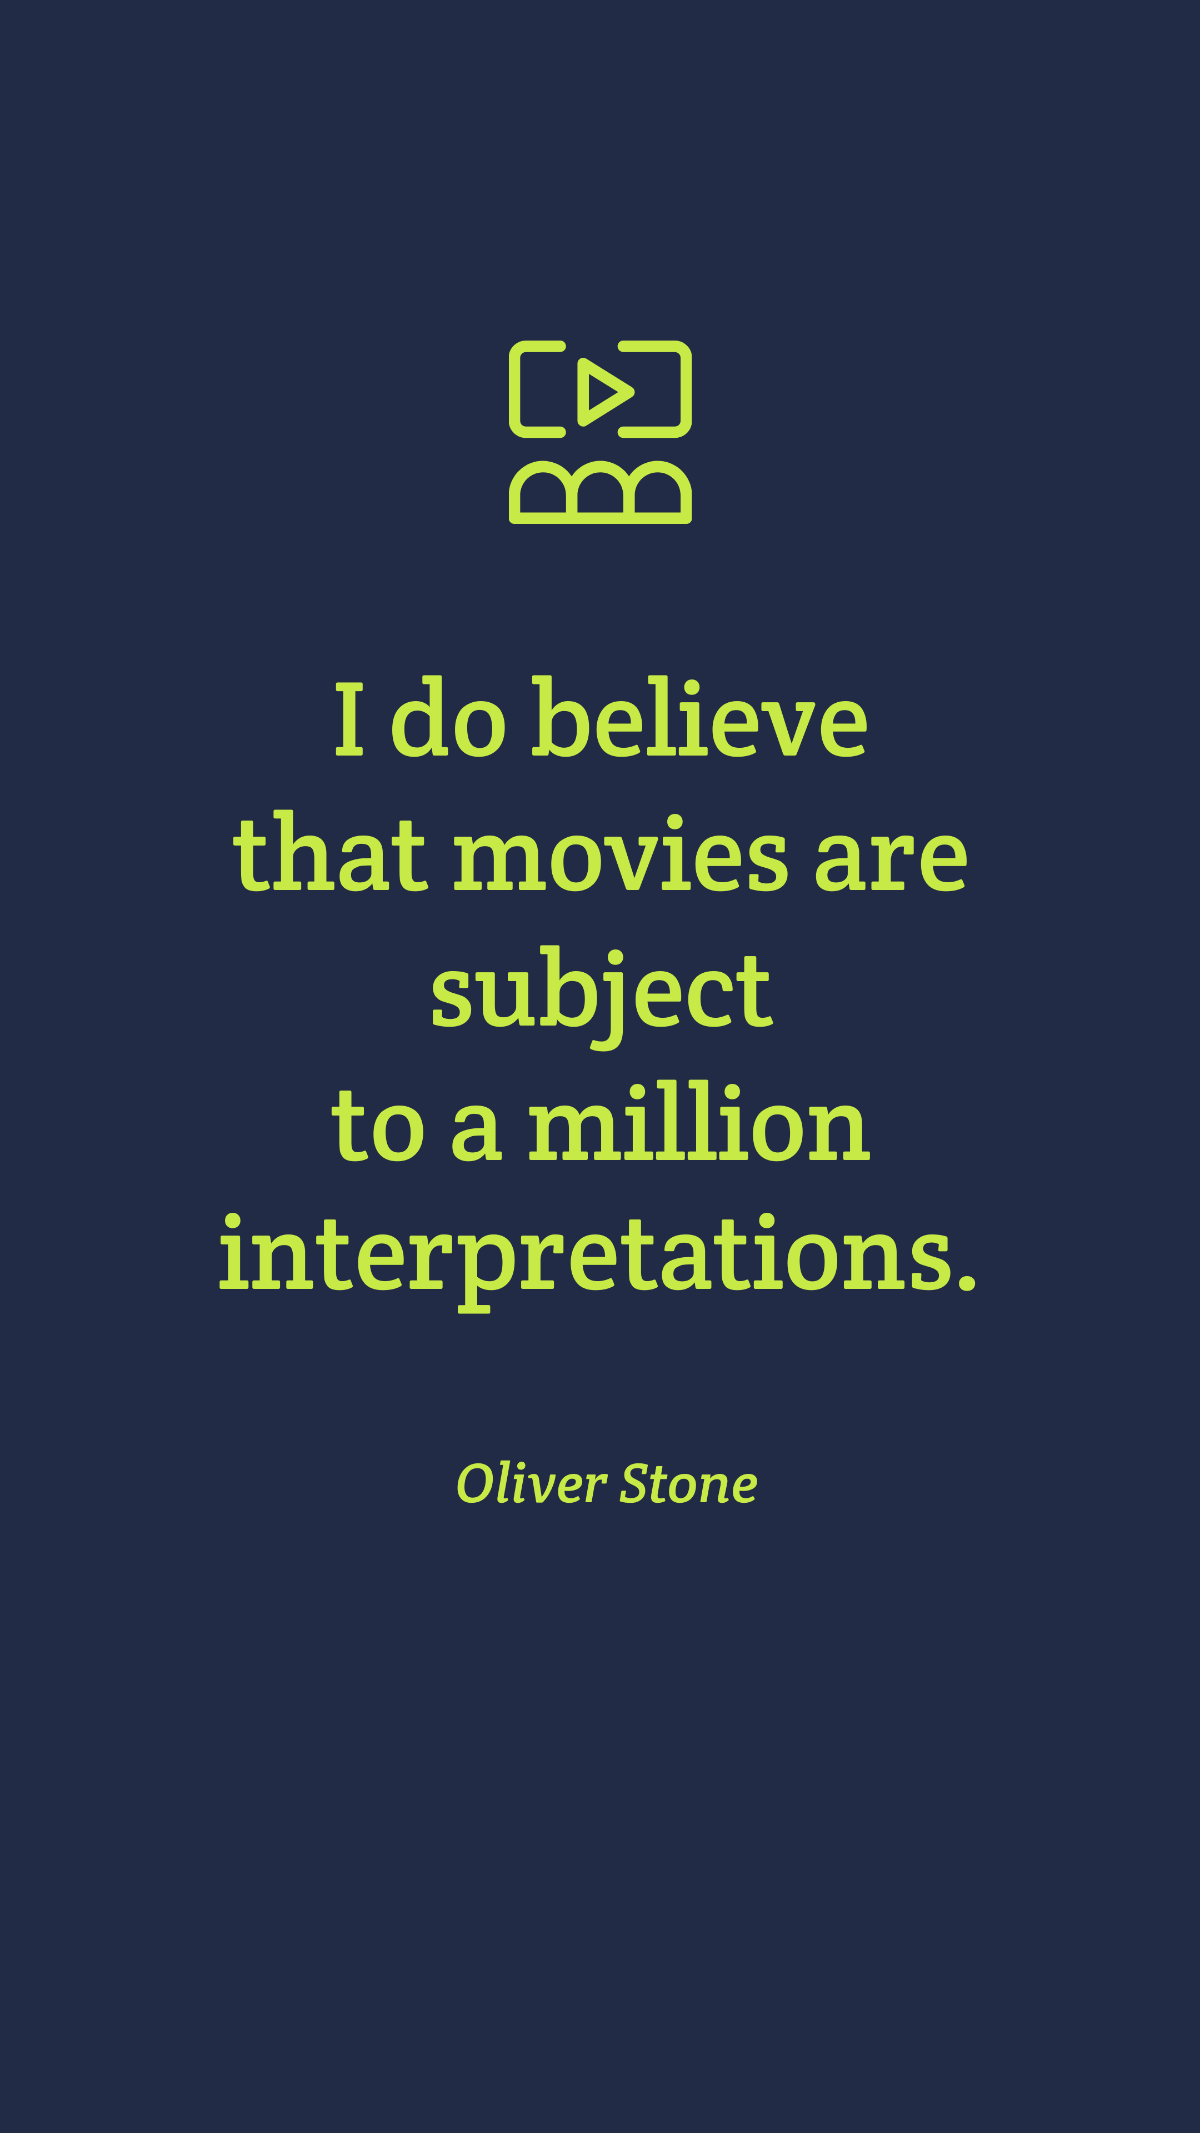 Oliver Stone - I do believe that movies are subject to a million interpretations.